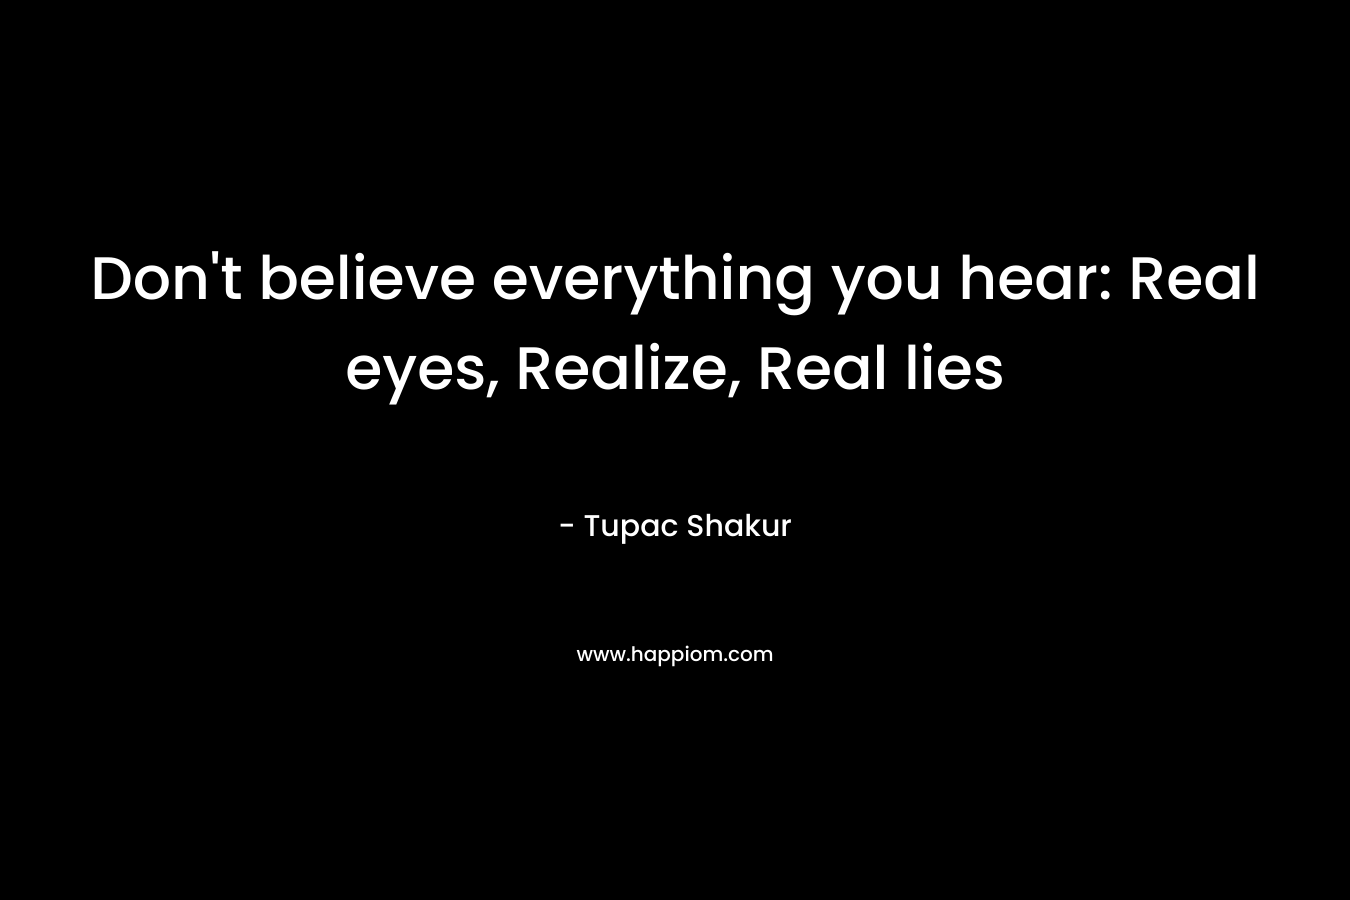 Don’t believe everything you hear: Real eyes, Realize, Real lies – Tupac Shakur